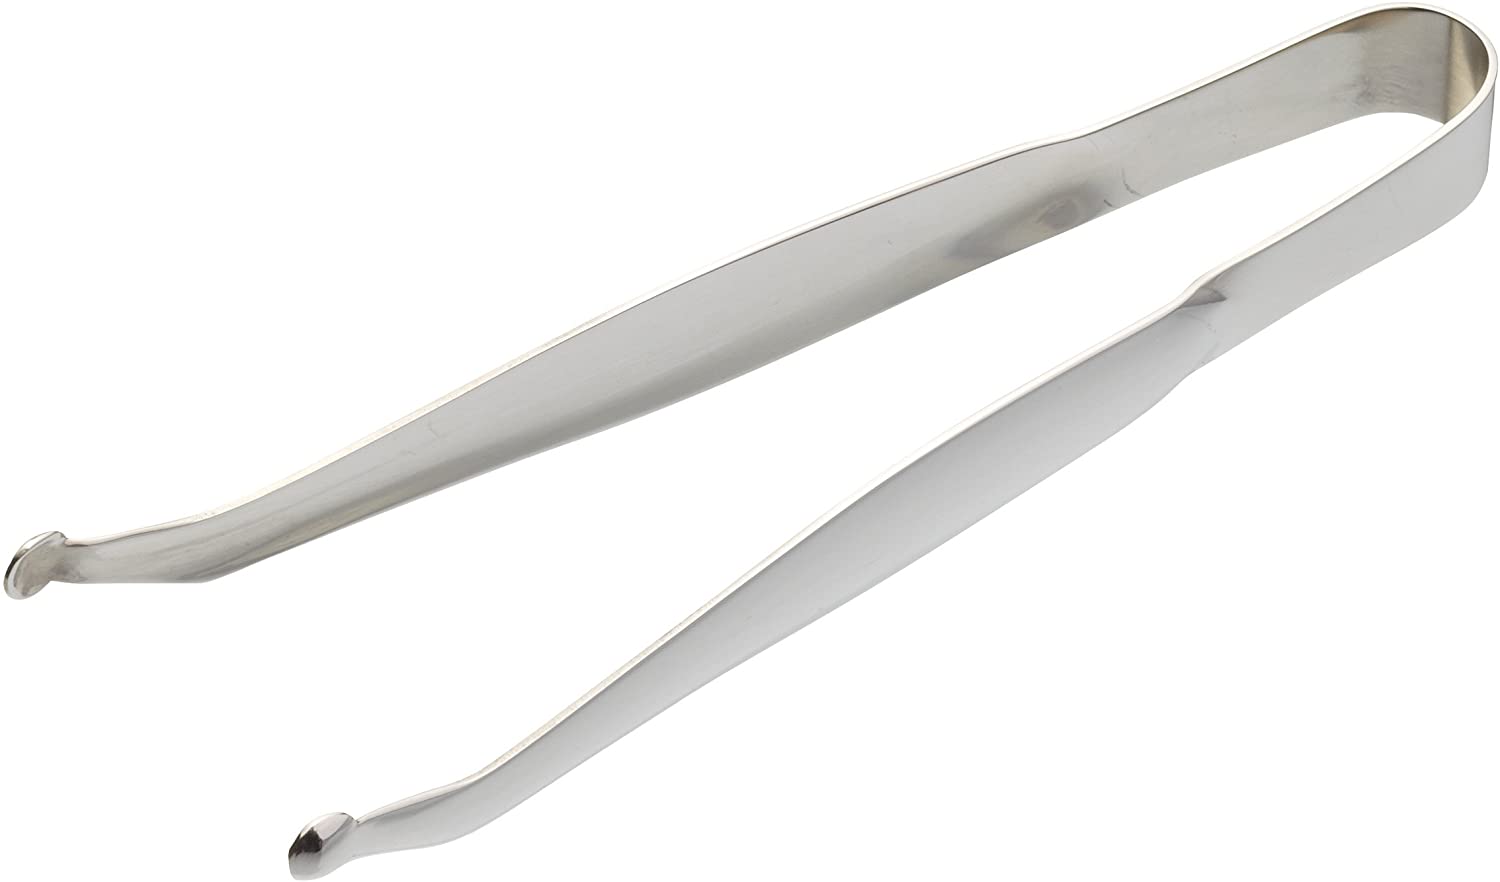 KitchenCraft Kitchen Craft Sweetly Does It Stainless Steel 10.5 cm Icing Tongs